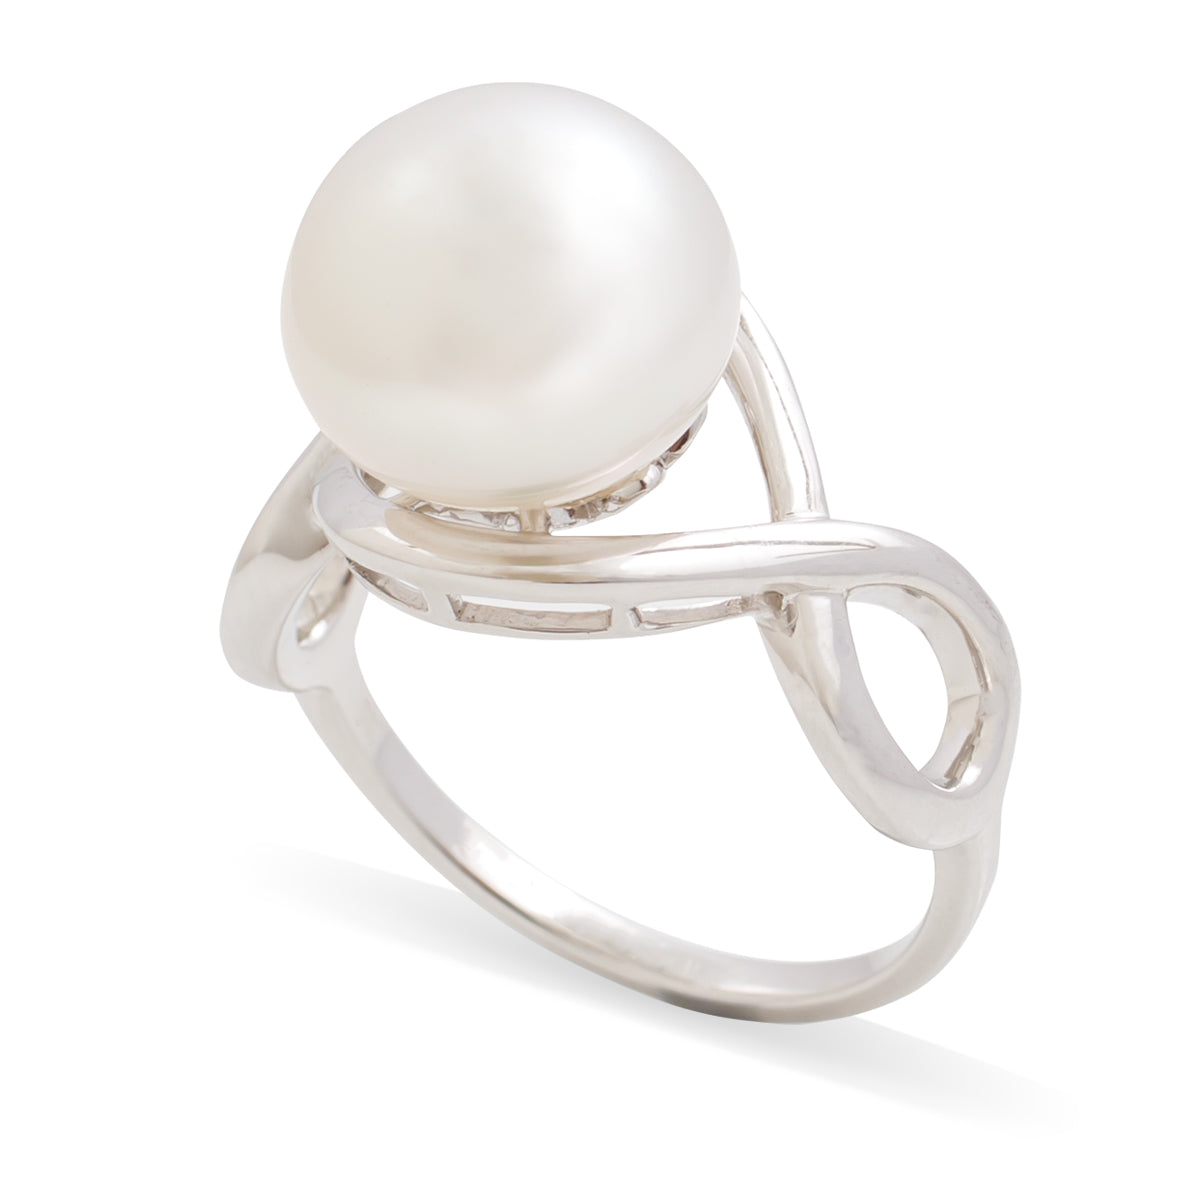 9K White Gold Australian South Sea Cultured 11 - 12 mm Pearl Ring